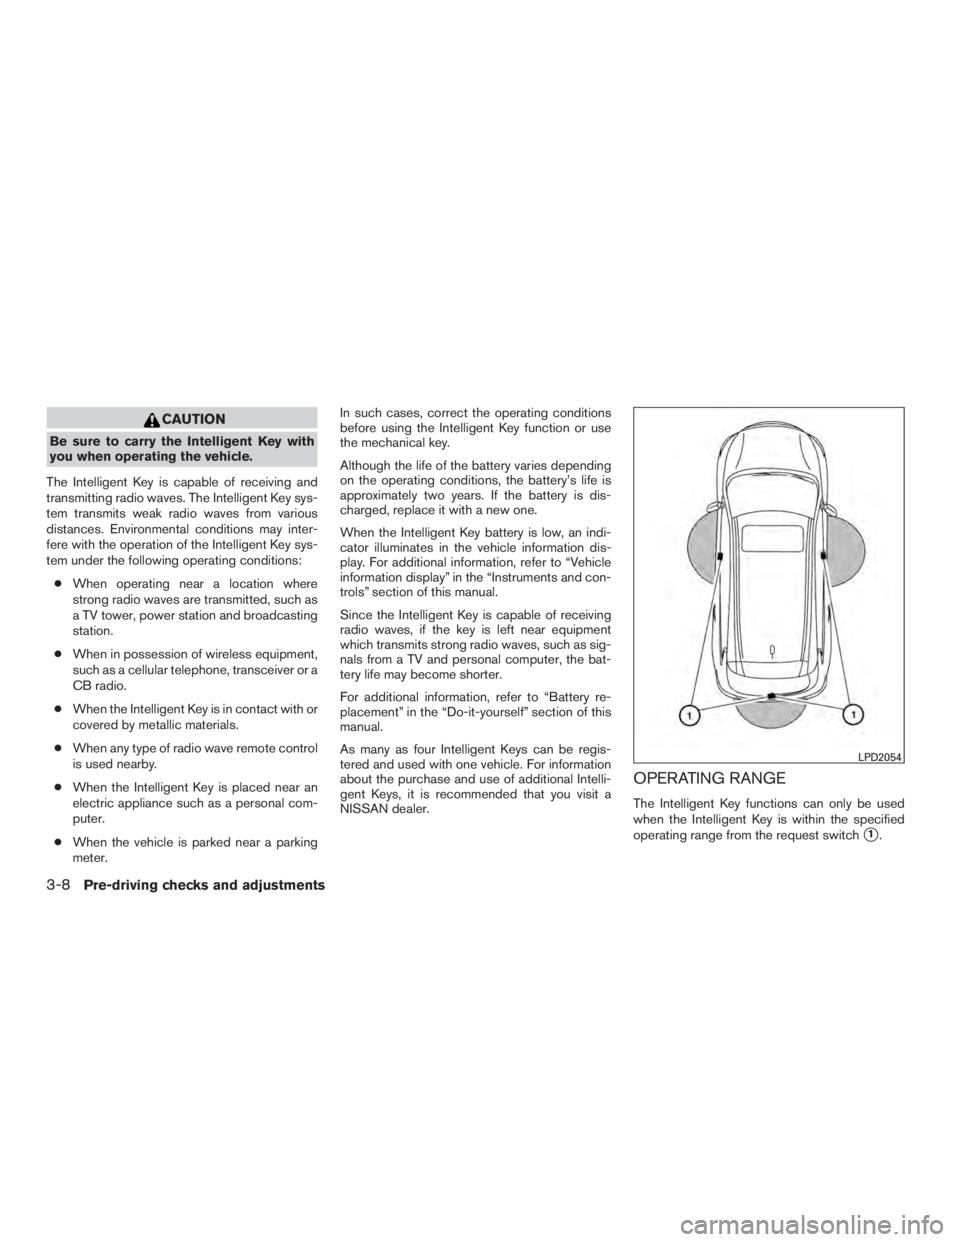 NISSAN MURANO PLATINUM 2017  Owners Manual CAUTION
Be sure to carry the Intelligent Key with
you when operating the vehicle.
The Intelligent Key is capable of receiving and
transmitting radio waves. The Intelligent Key sys-
tem transmits weak 